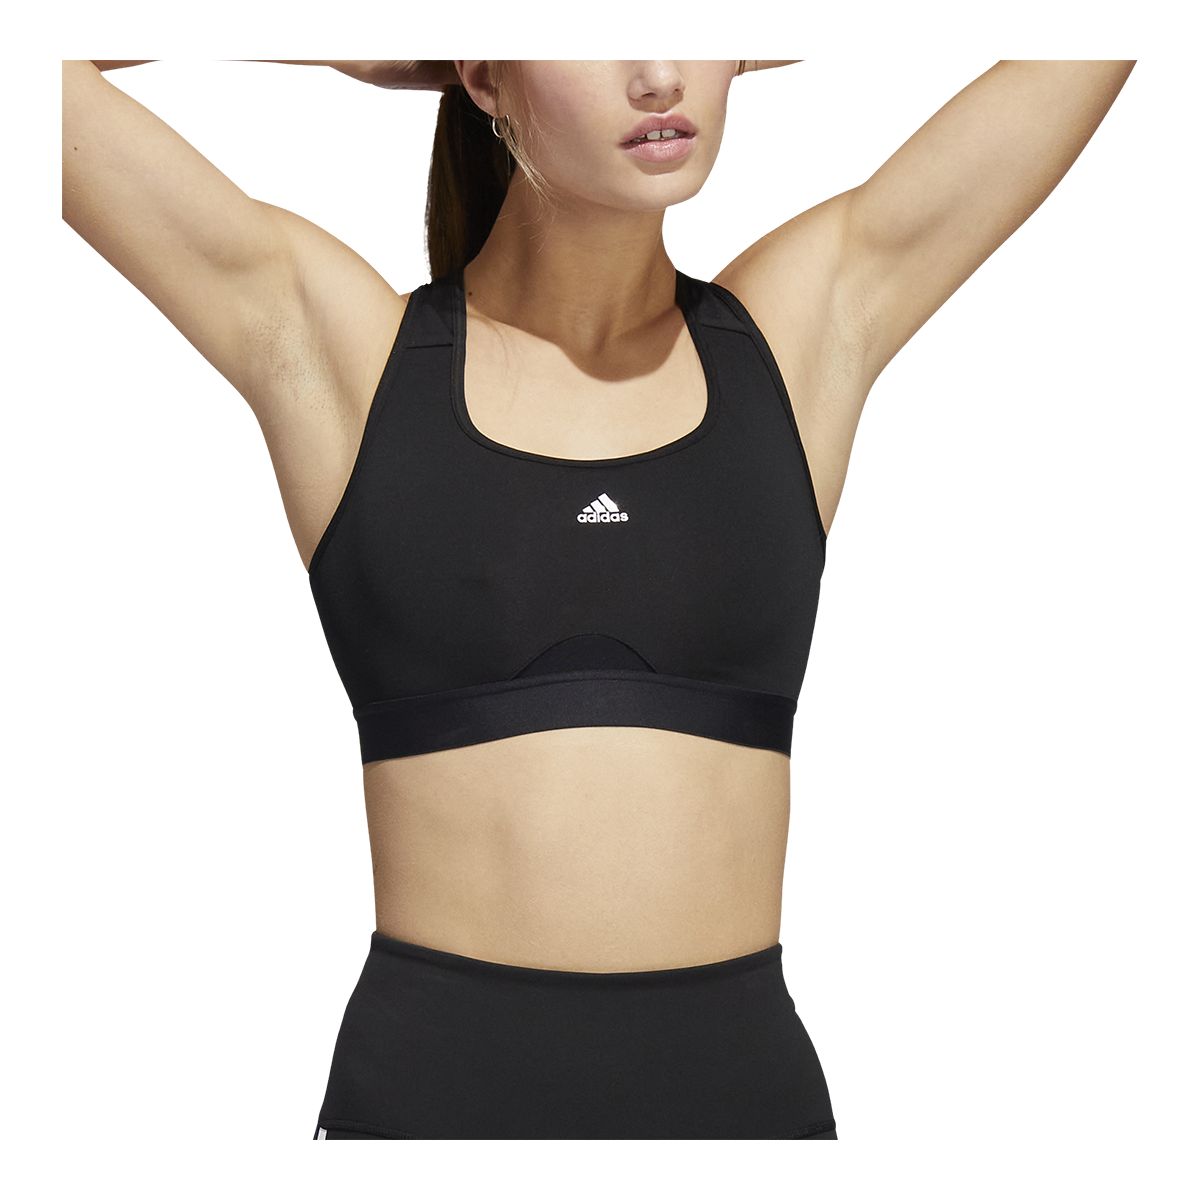  adidas Women's Techfit Solid Bra (Black, Small) : Clothing,  Shoes & Jewelry